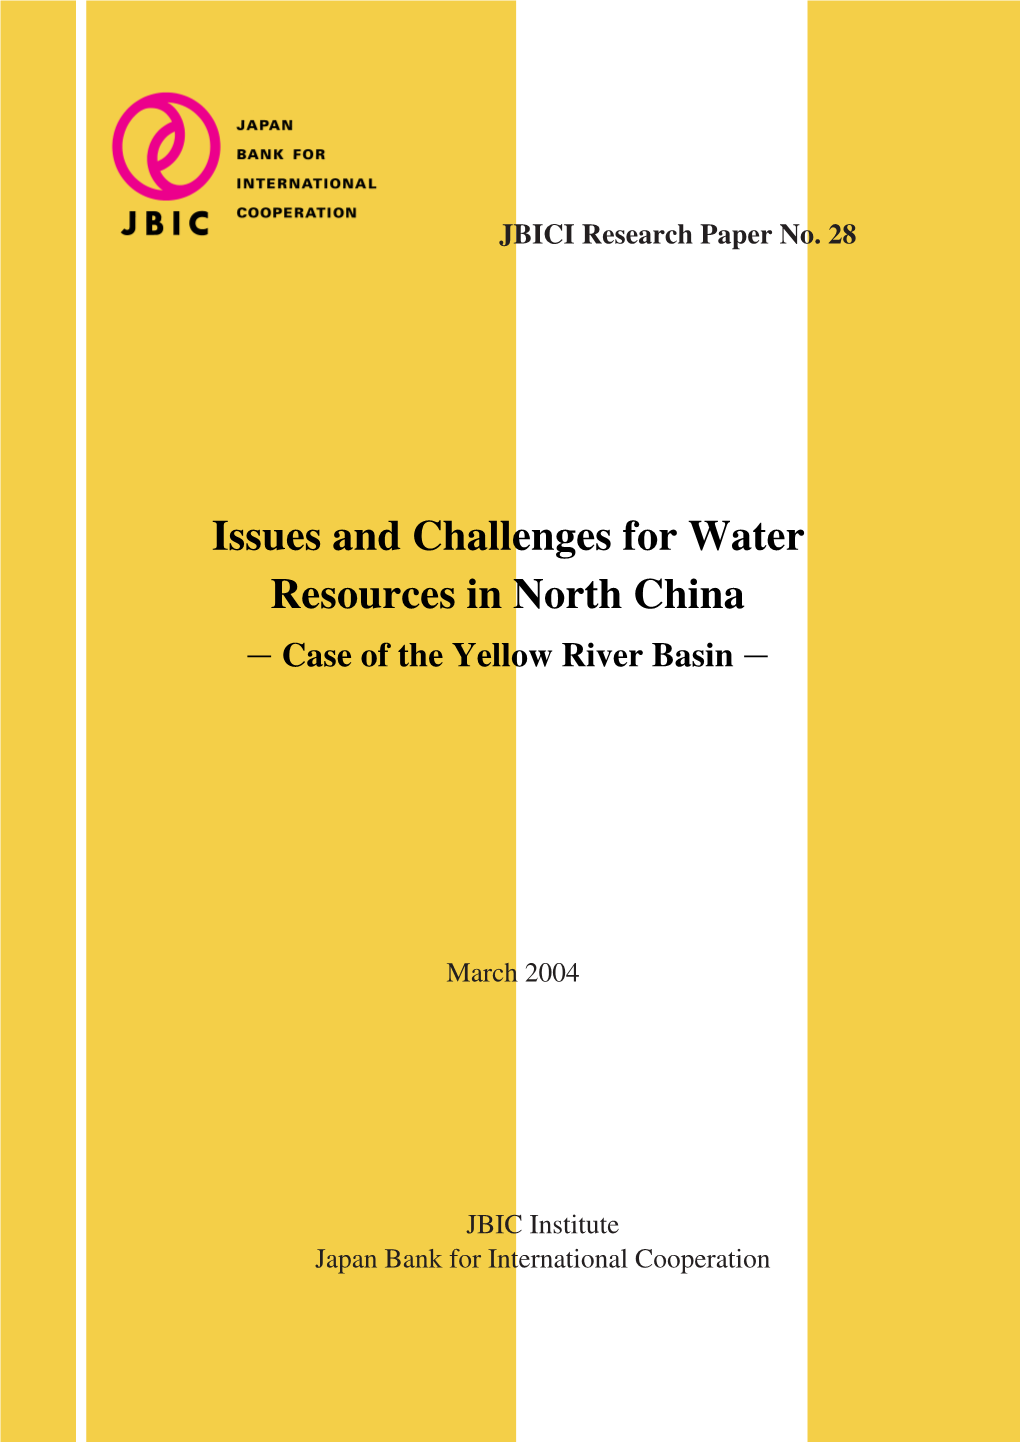 Issues and Challenges for Water Resources in North China － Case of the Yellow River Basin －